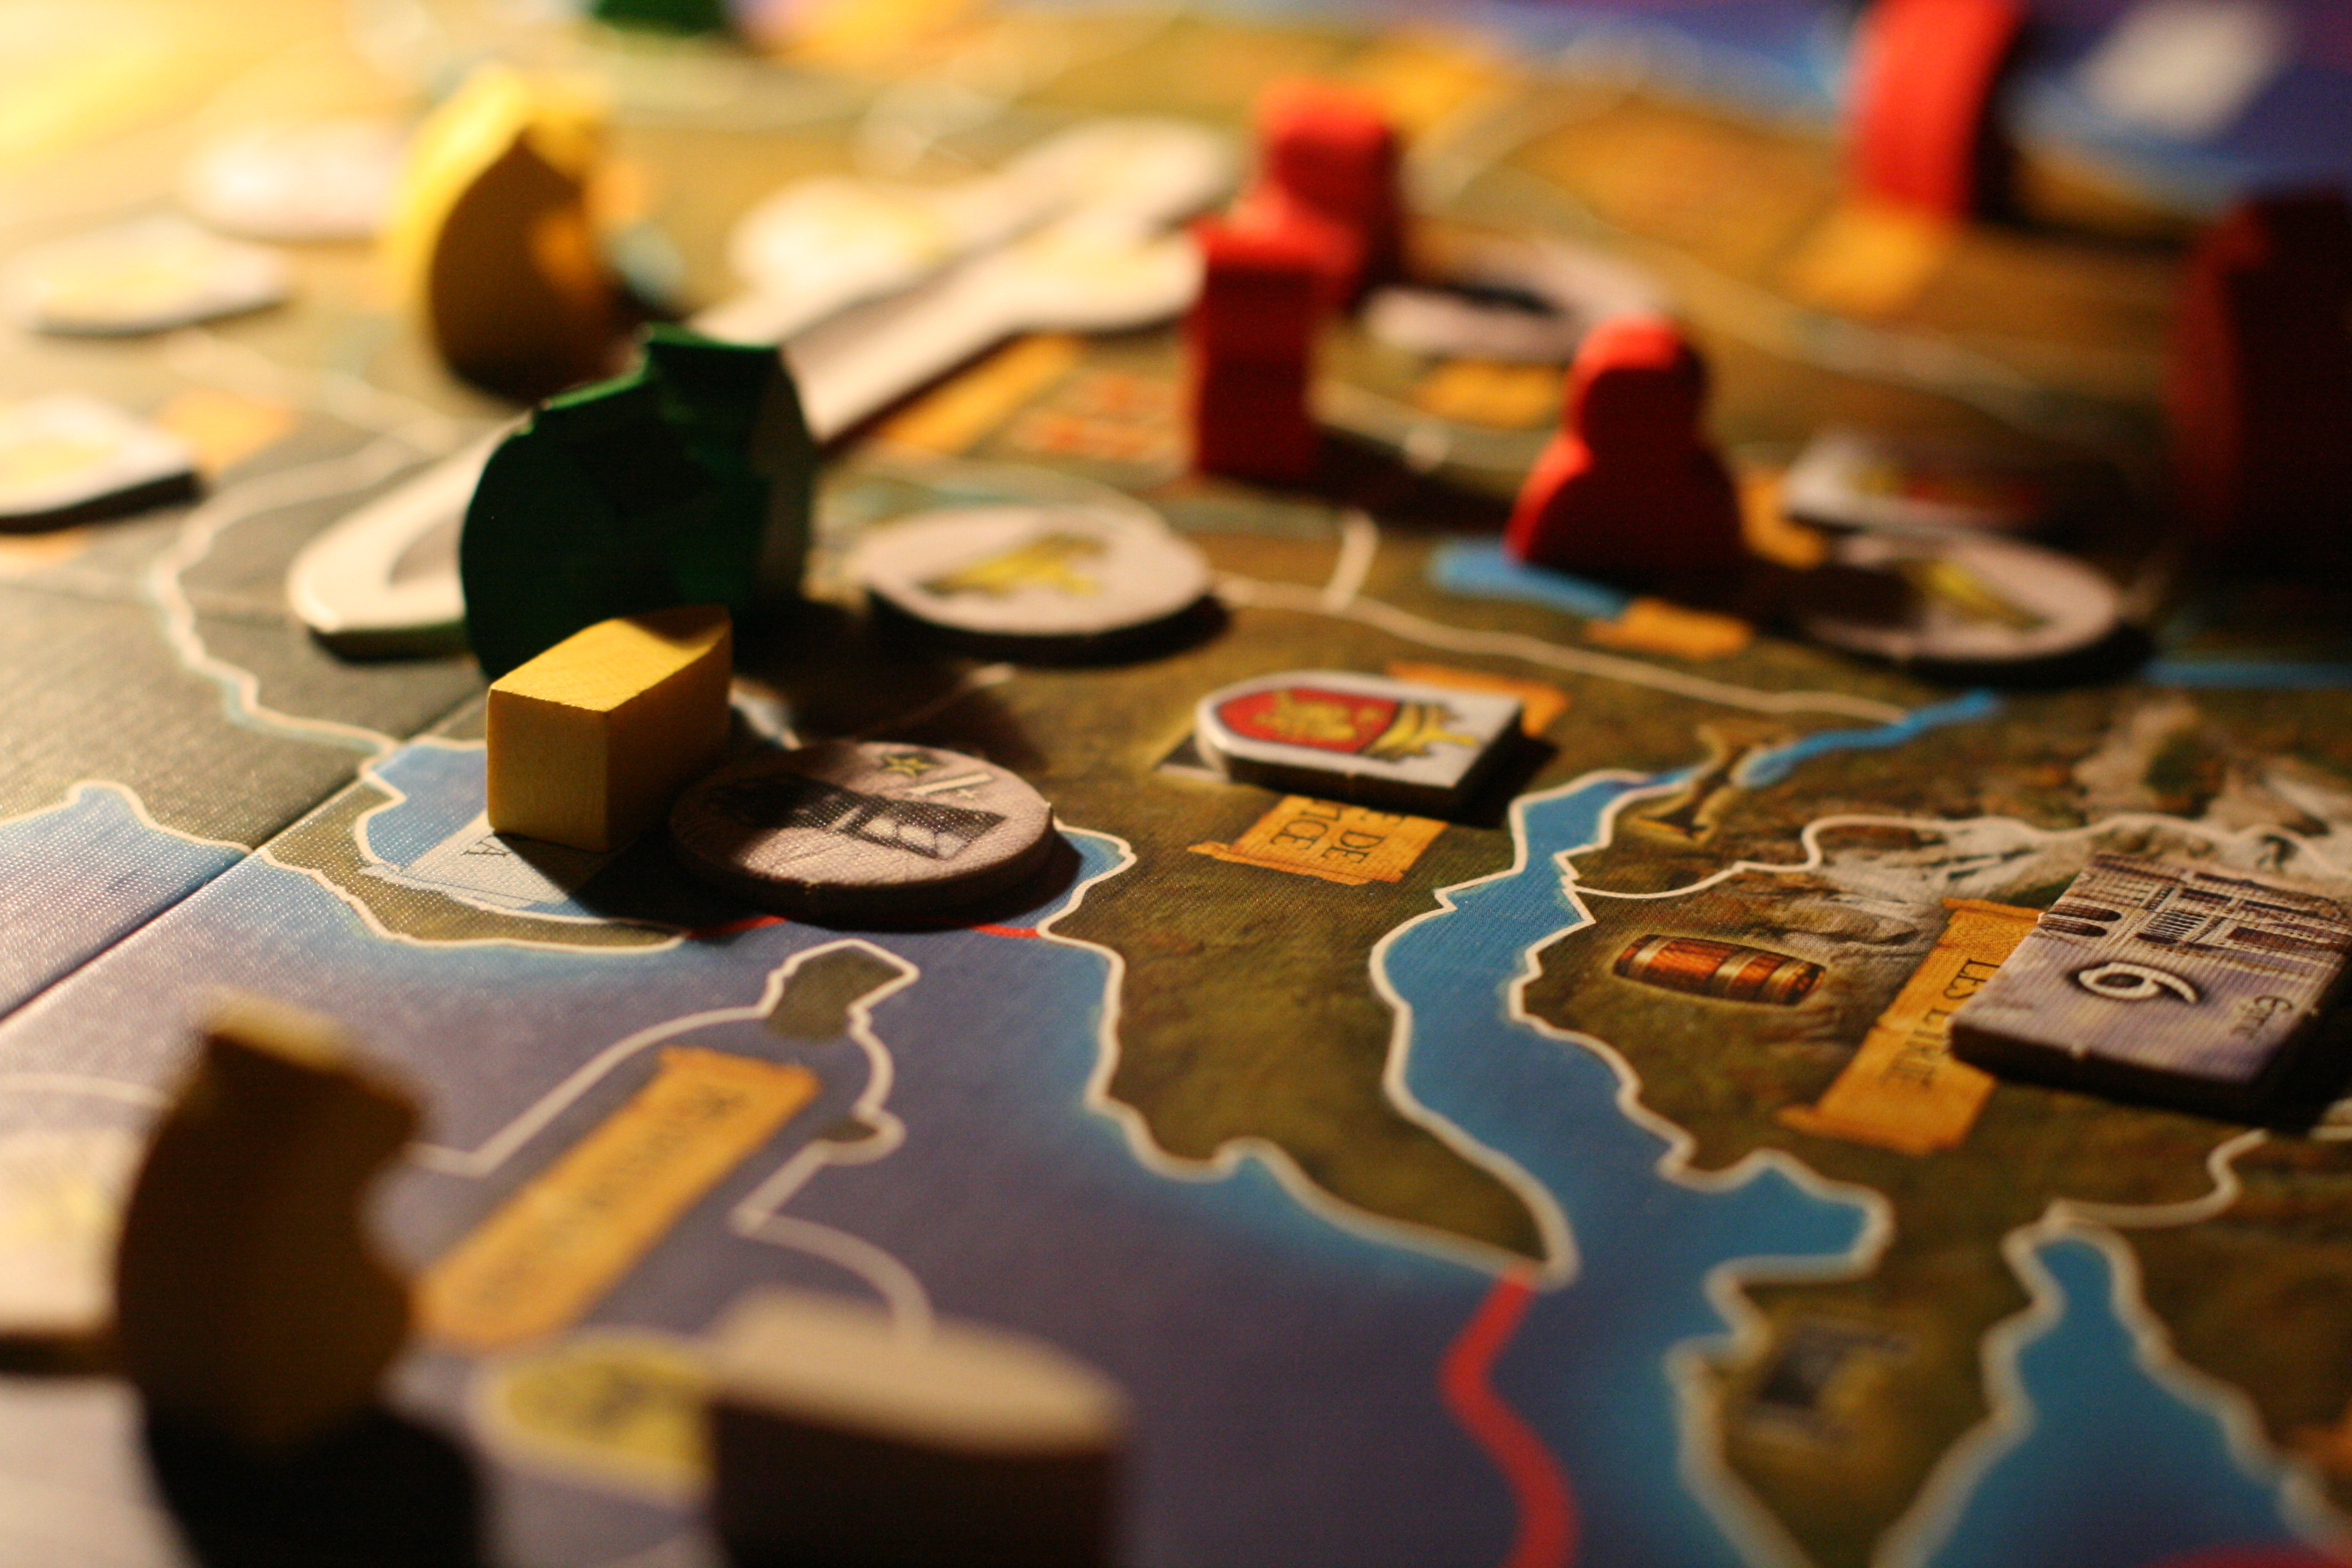 Man Made A Game of Thrones: The Board Game HD Wallpaper | Background Image